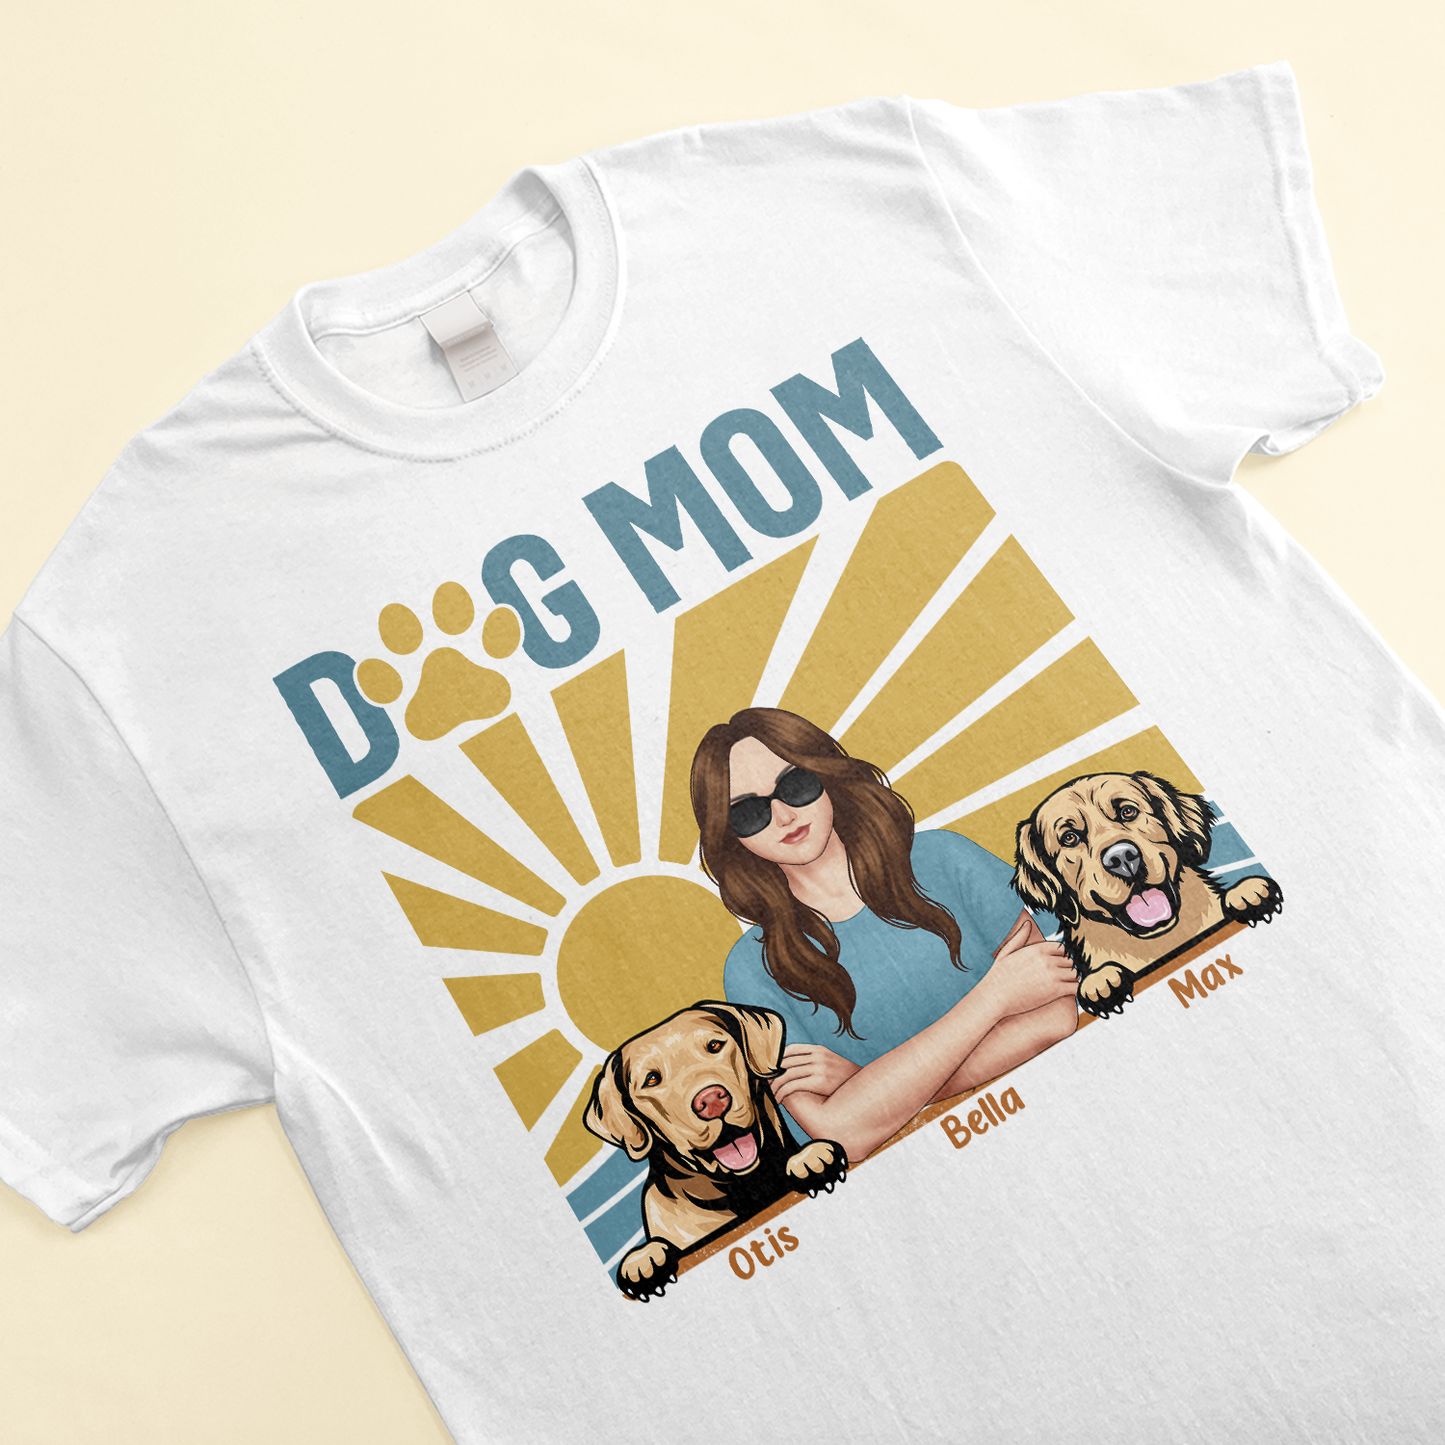 Dog Mom New Ver - Personalized Shirt - Funny Birthday Gift For Dog Mom, Wife, Daughter, Bestie